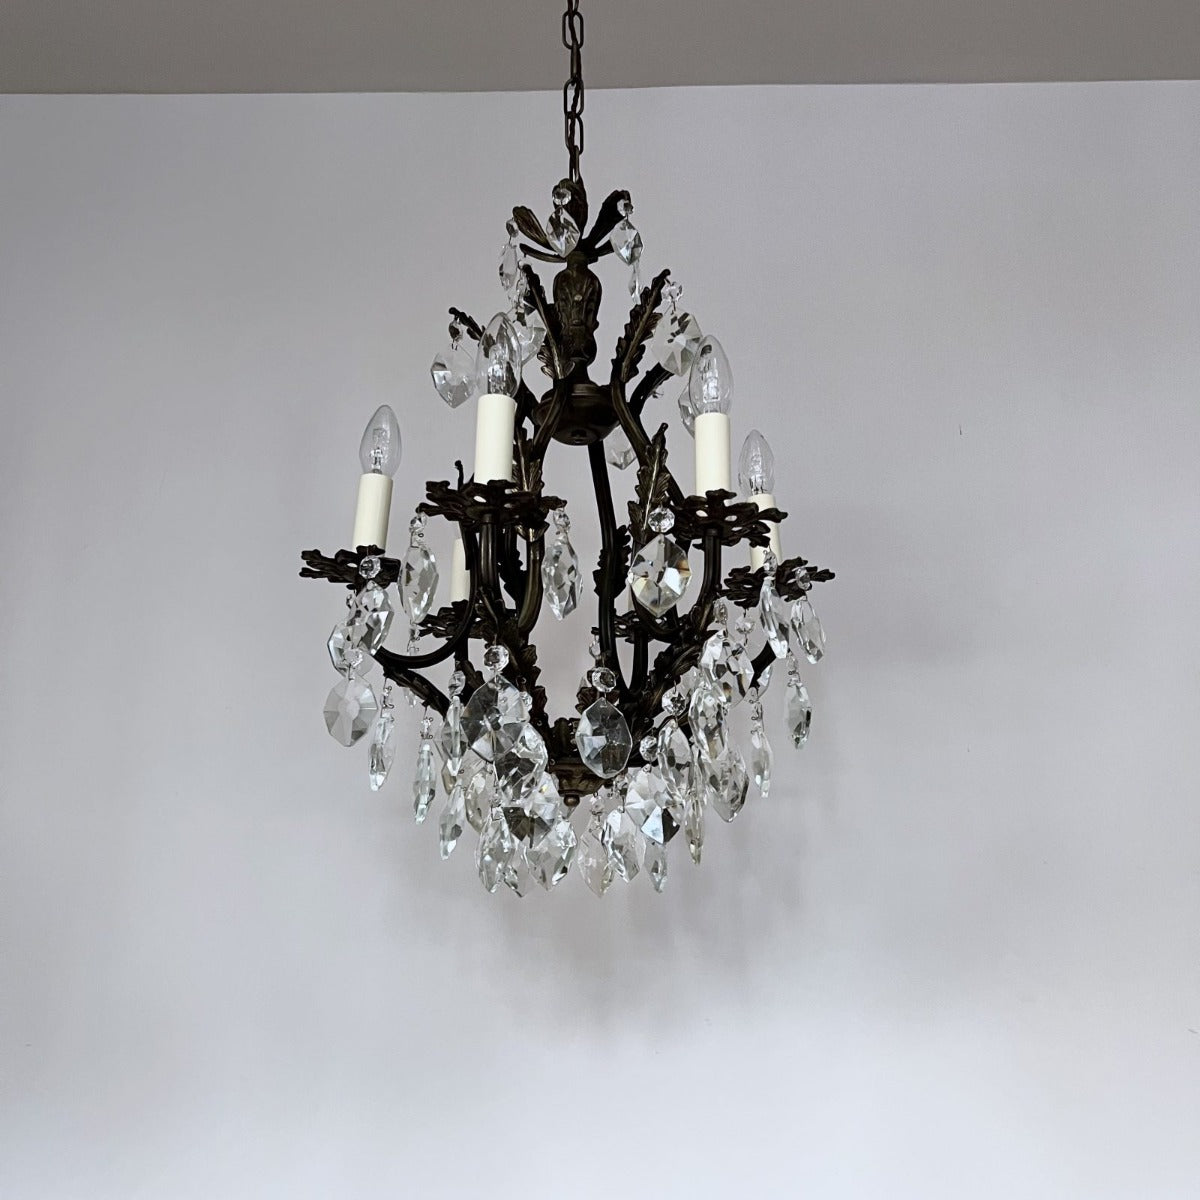 Ornate Italian Antique Birdcage Chandelier with Crystal Iceberg Drops